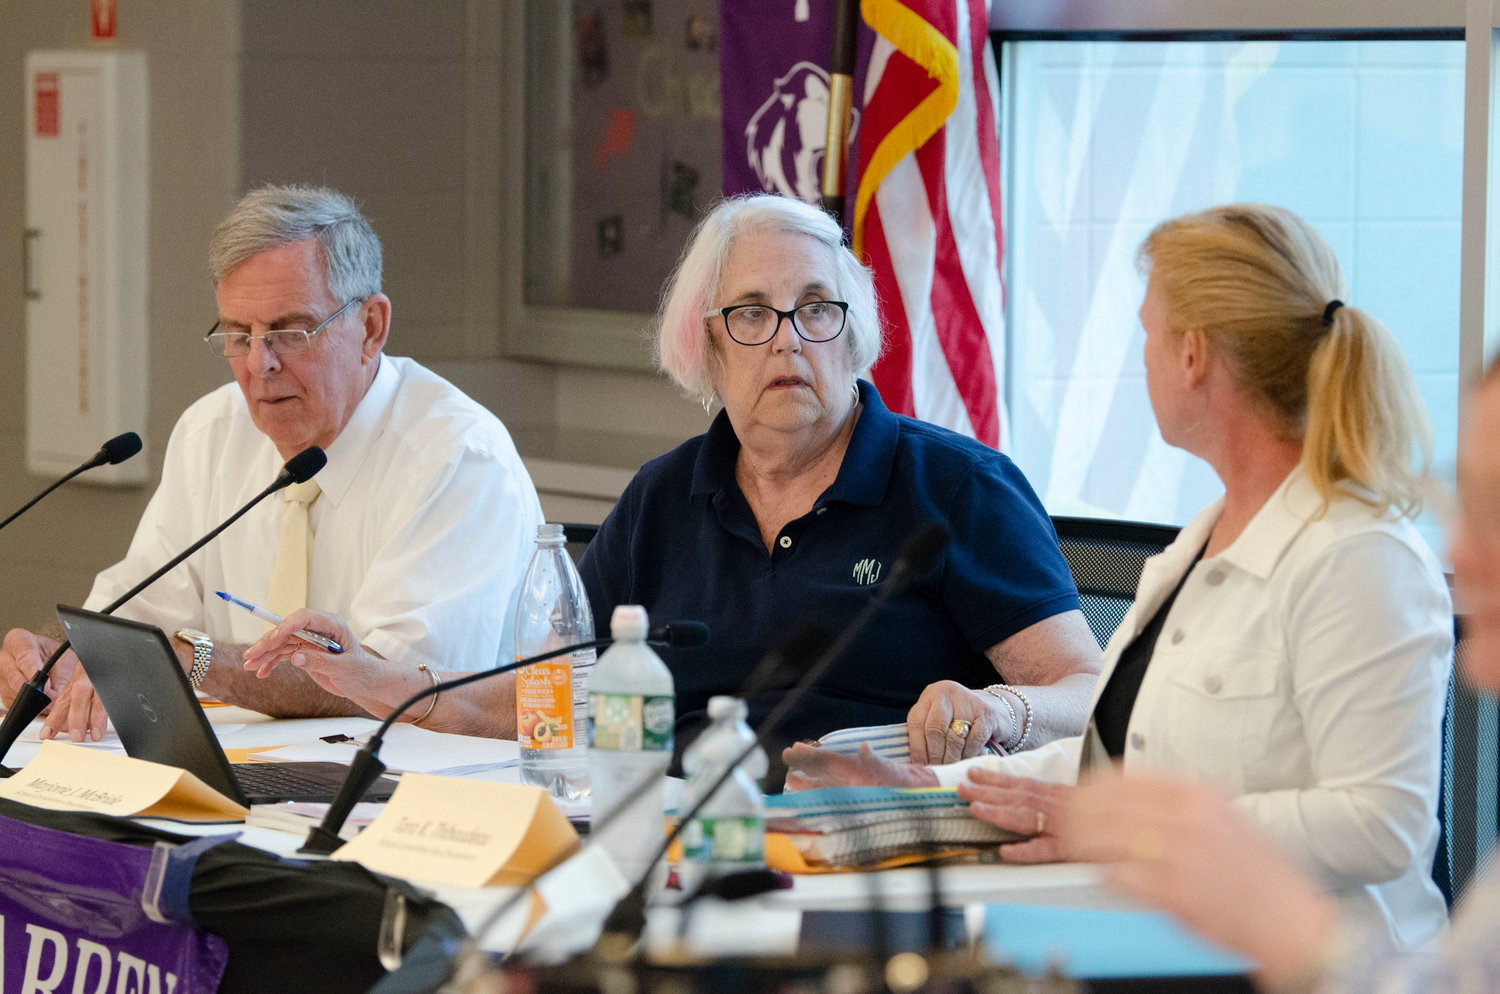 School committee members Victor Cabral, Marjorie McBride and Tara Thibaudeau discuss a point made by a resident during the open meeting at the high school on Monday night.